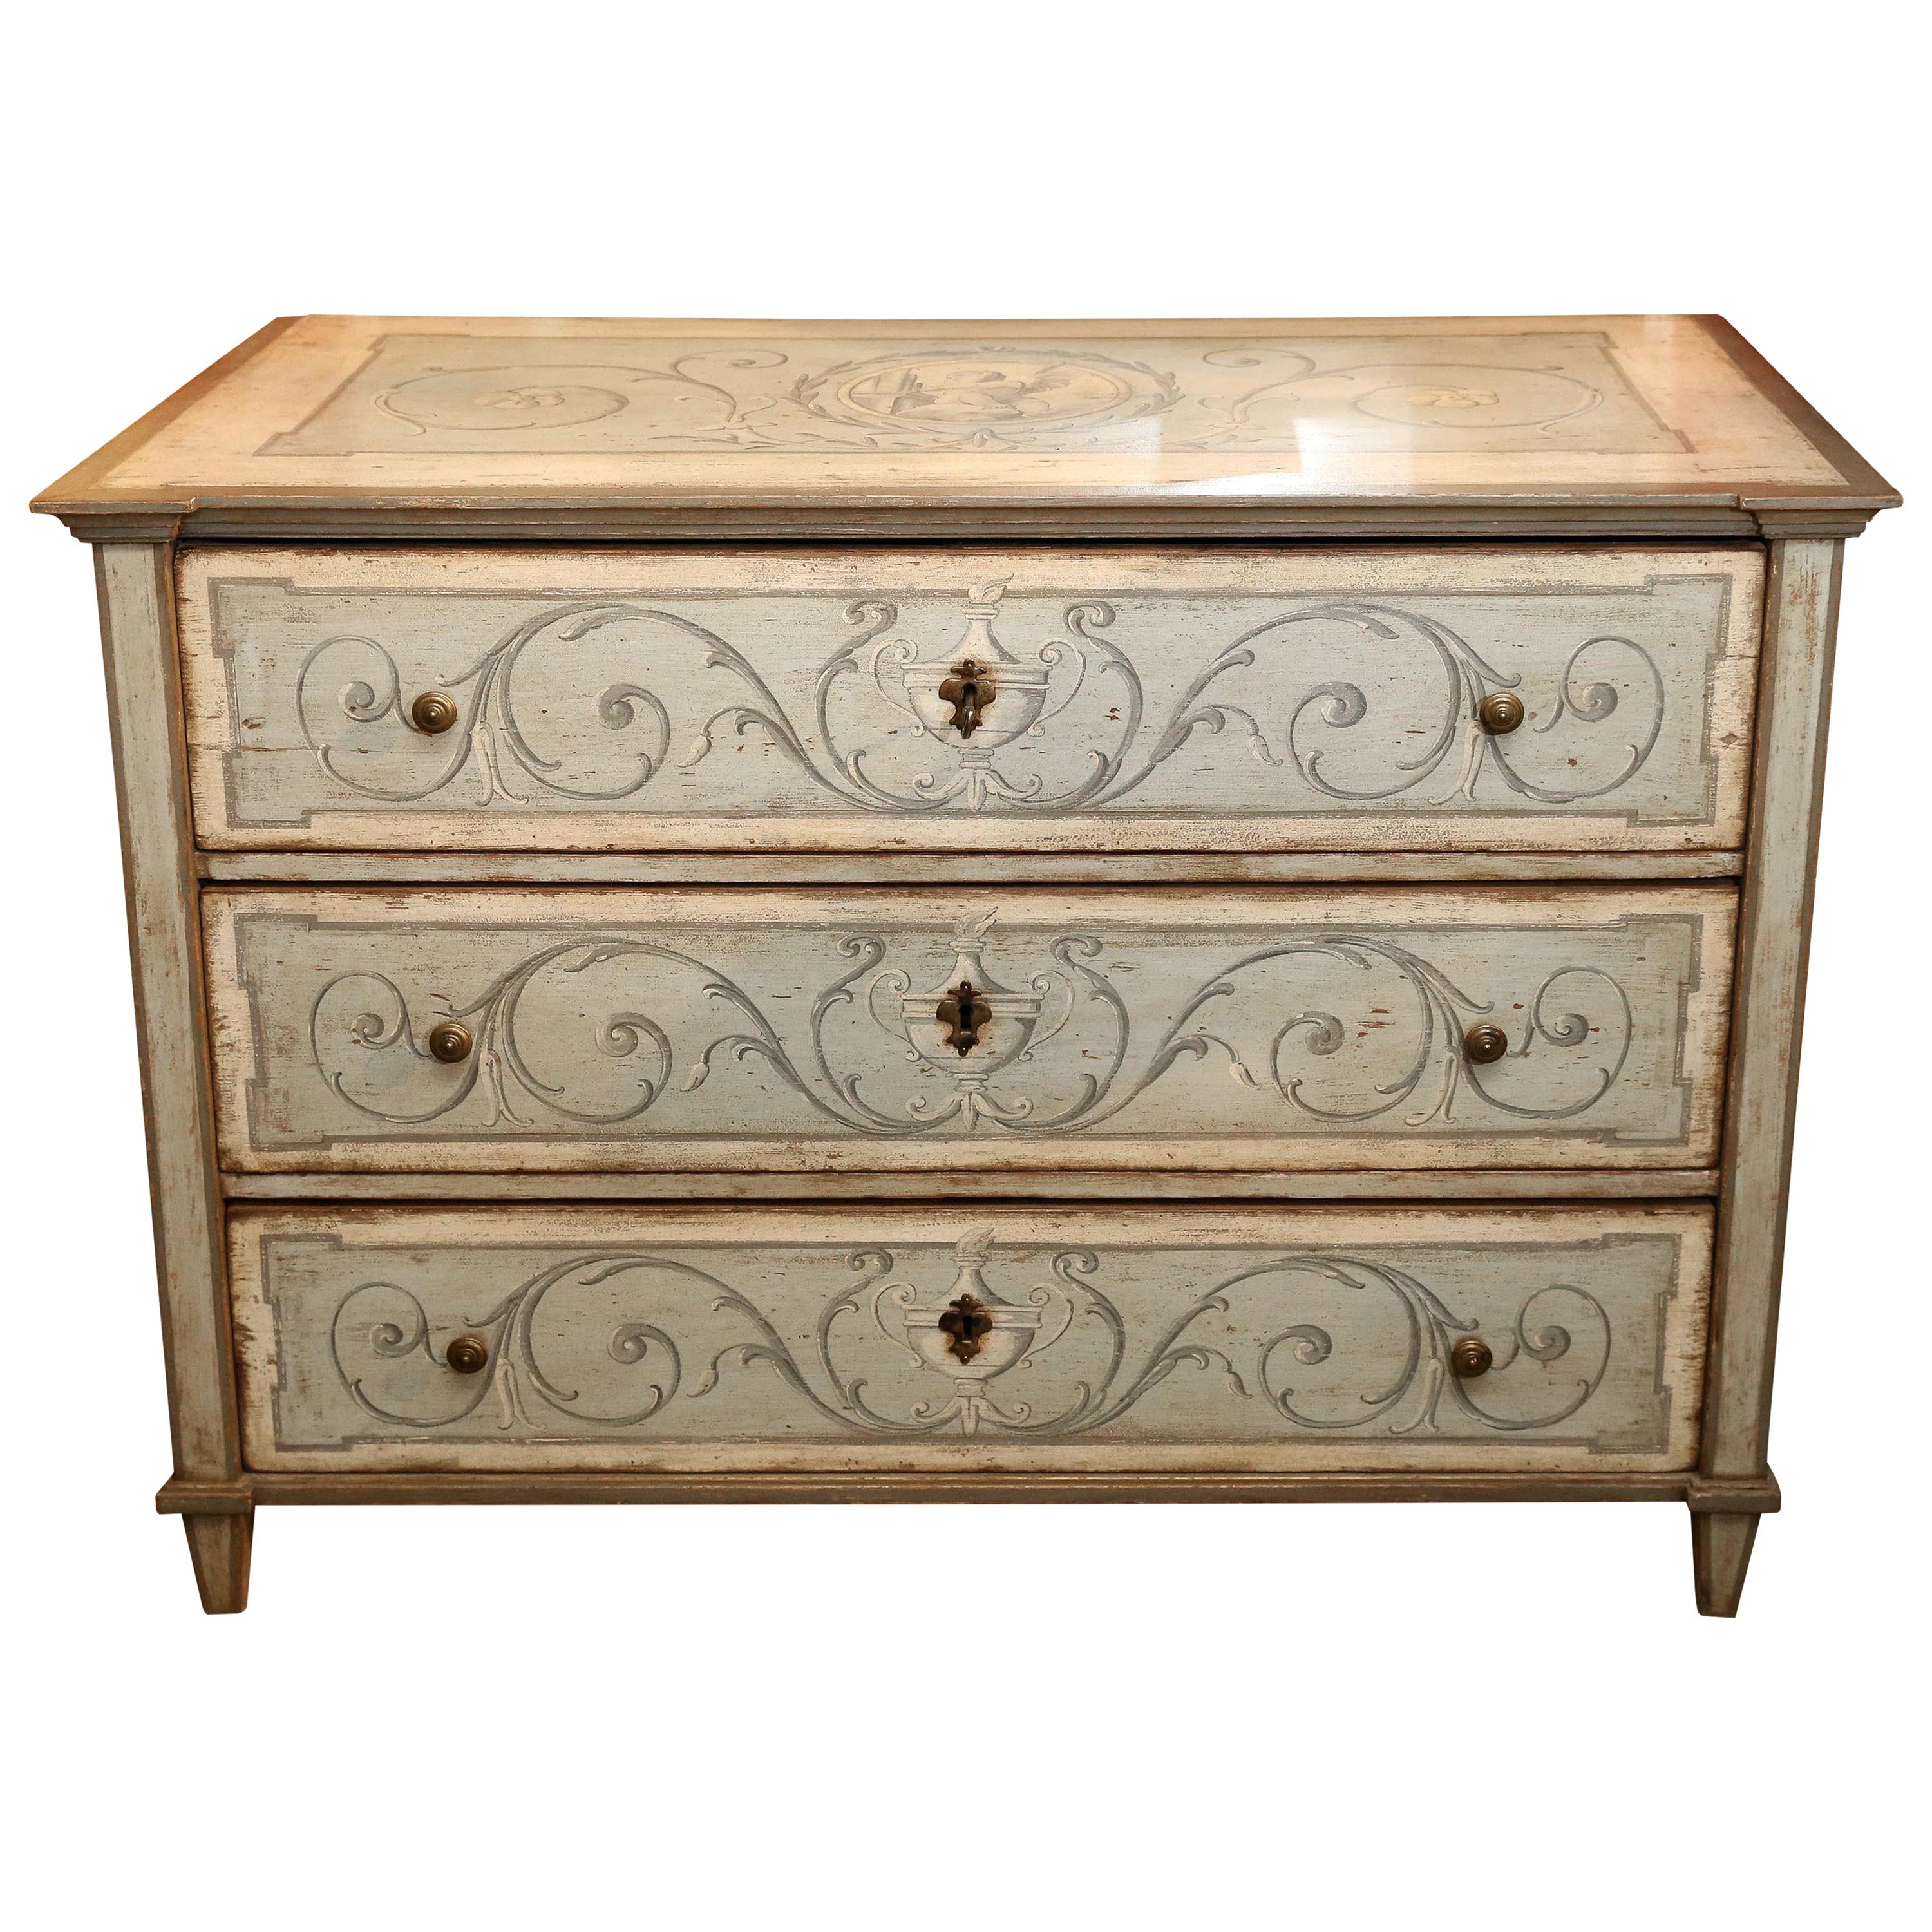 Polychromed Italian Neoclassical Style Chest, 19th Century For Sale